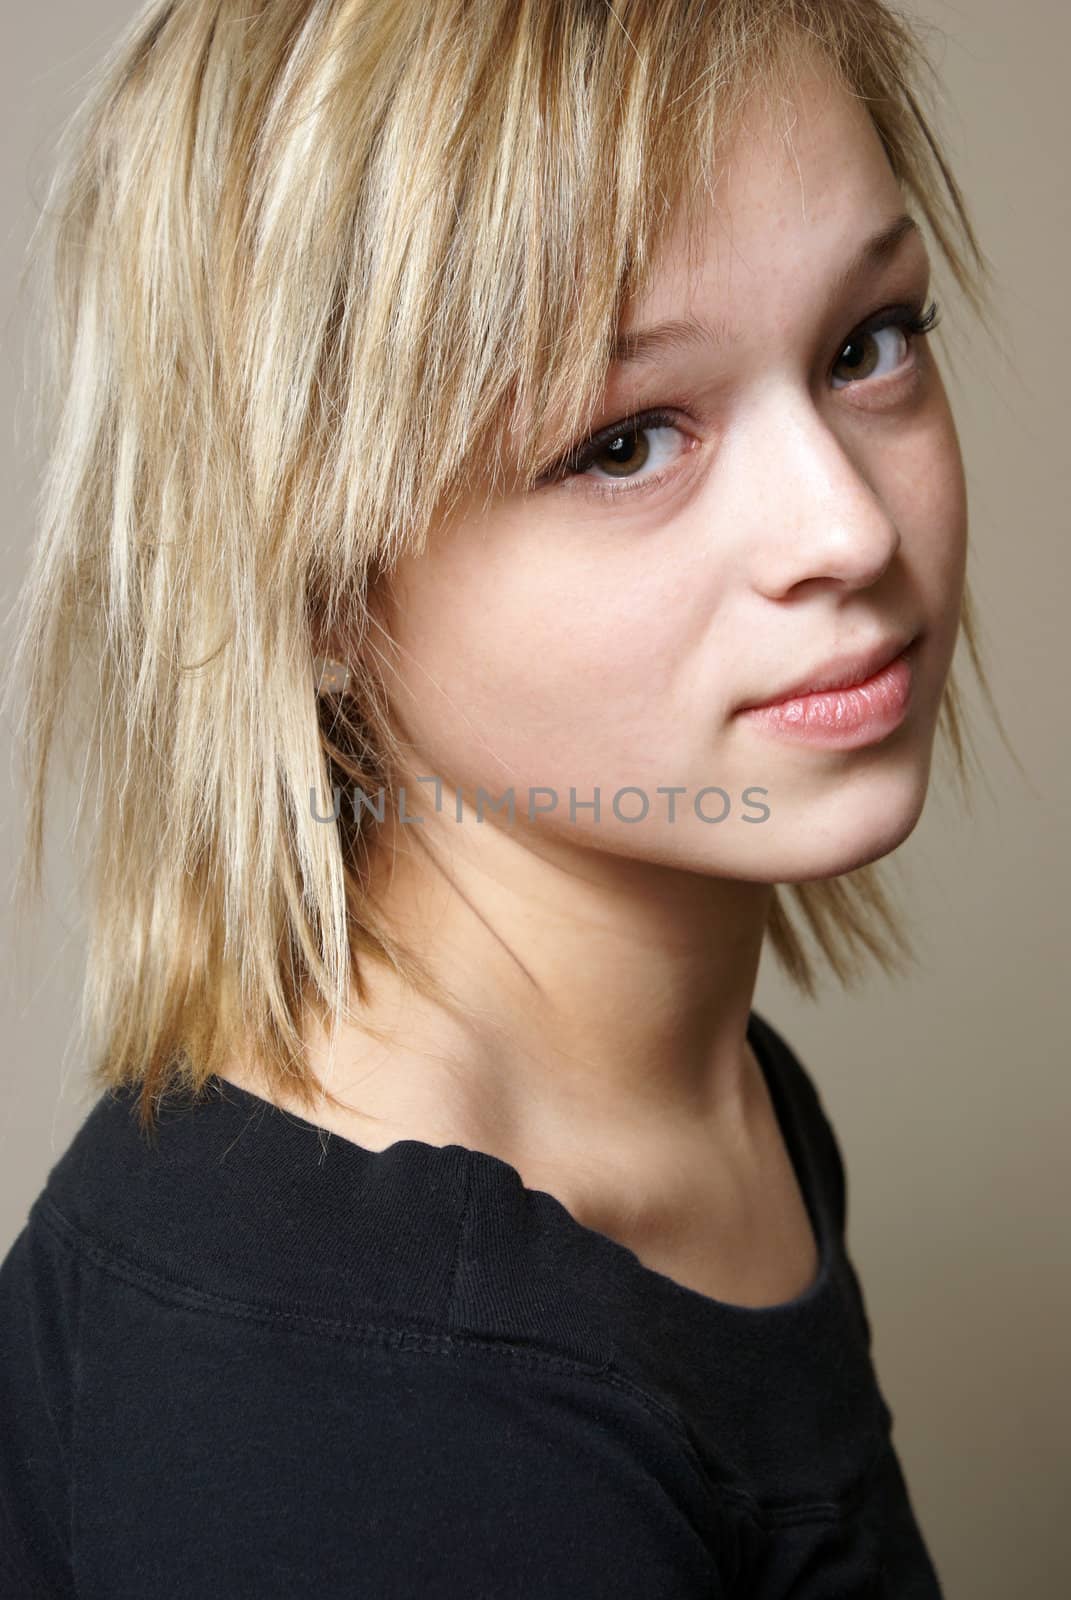 A casual portrait shot of an attractive woman.